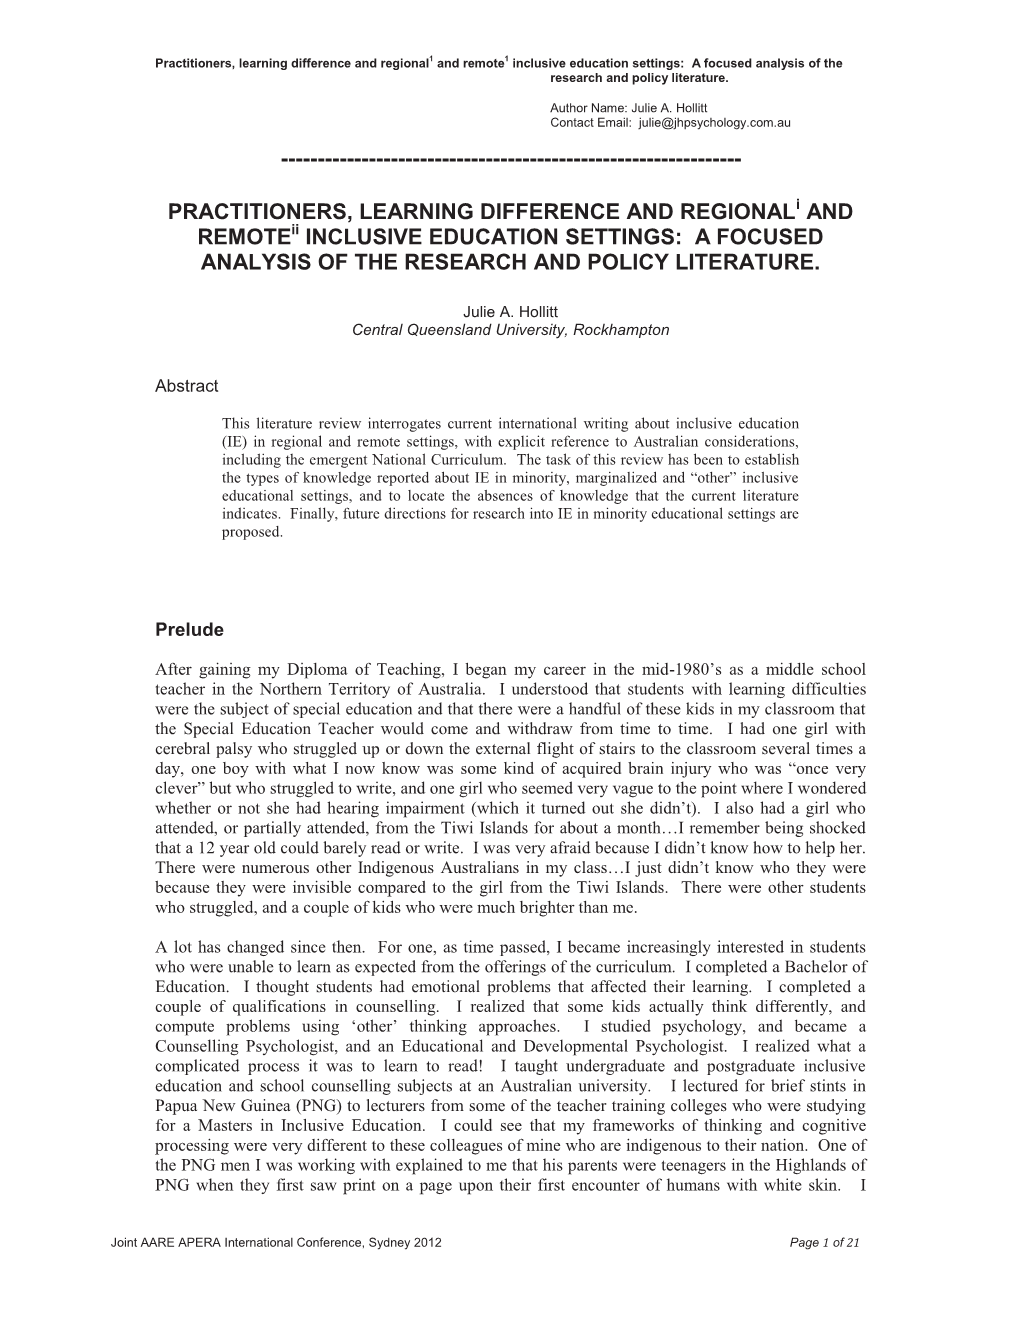 Practitioners, Learning Difference and Regional1 and Remote1 Inclusive Education Settings: a Focused Analysis of the Research and Policy Literature